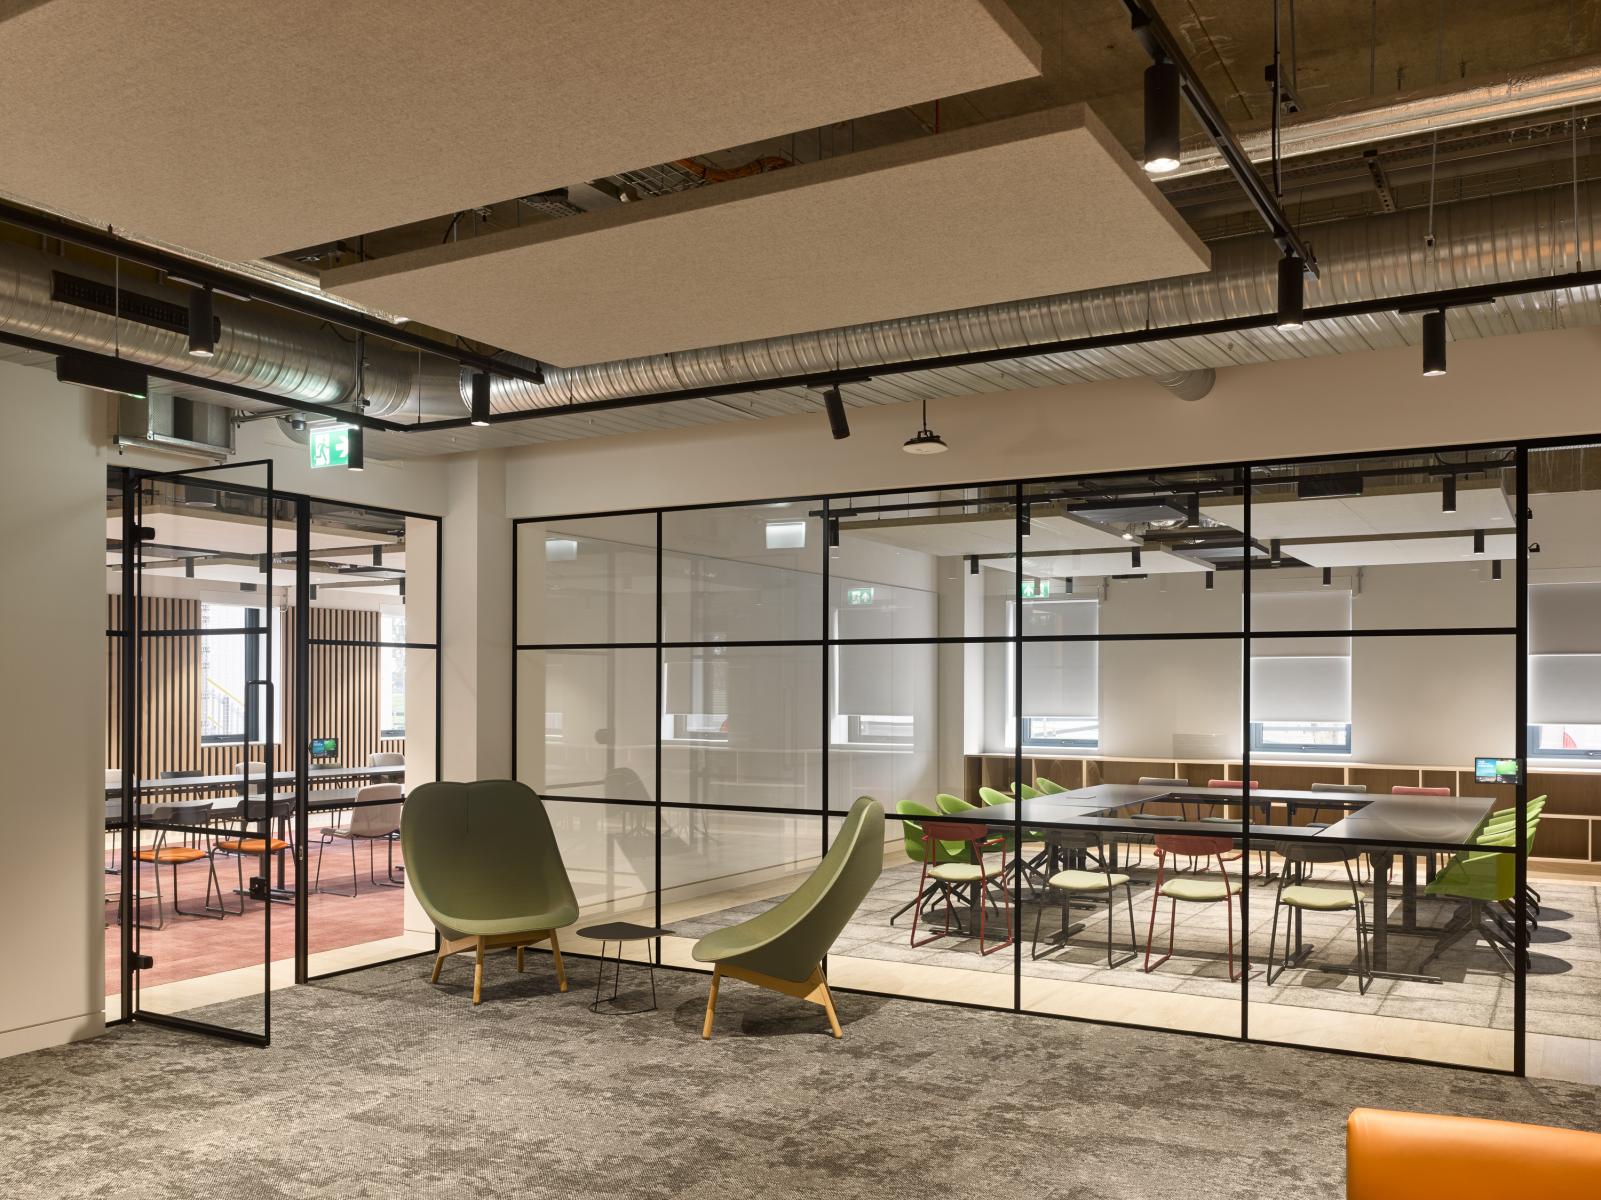 Institution of Engineering & Technology, Michael Faraday House Refurbishment By PRS Architects